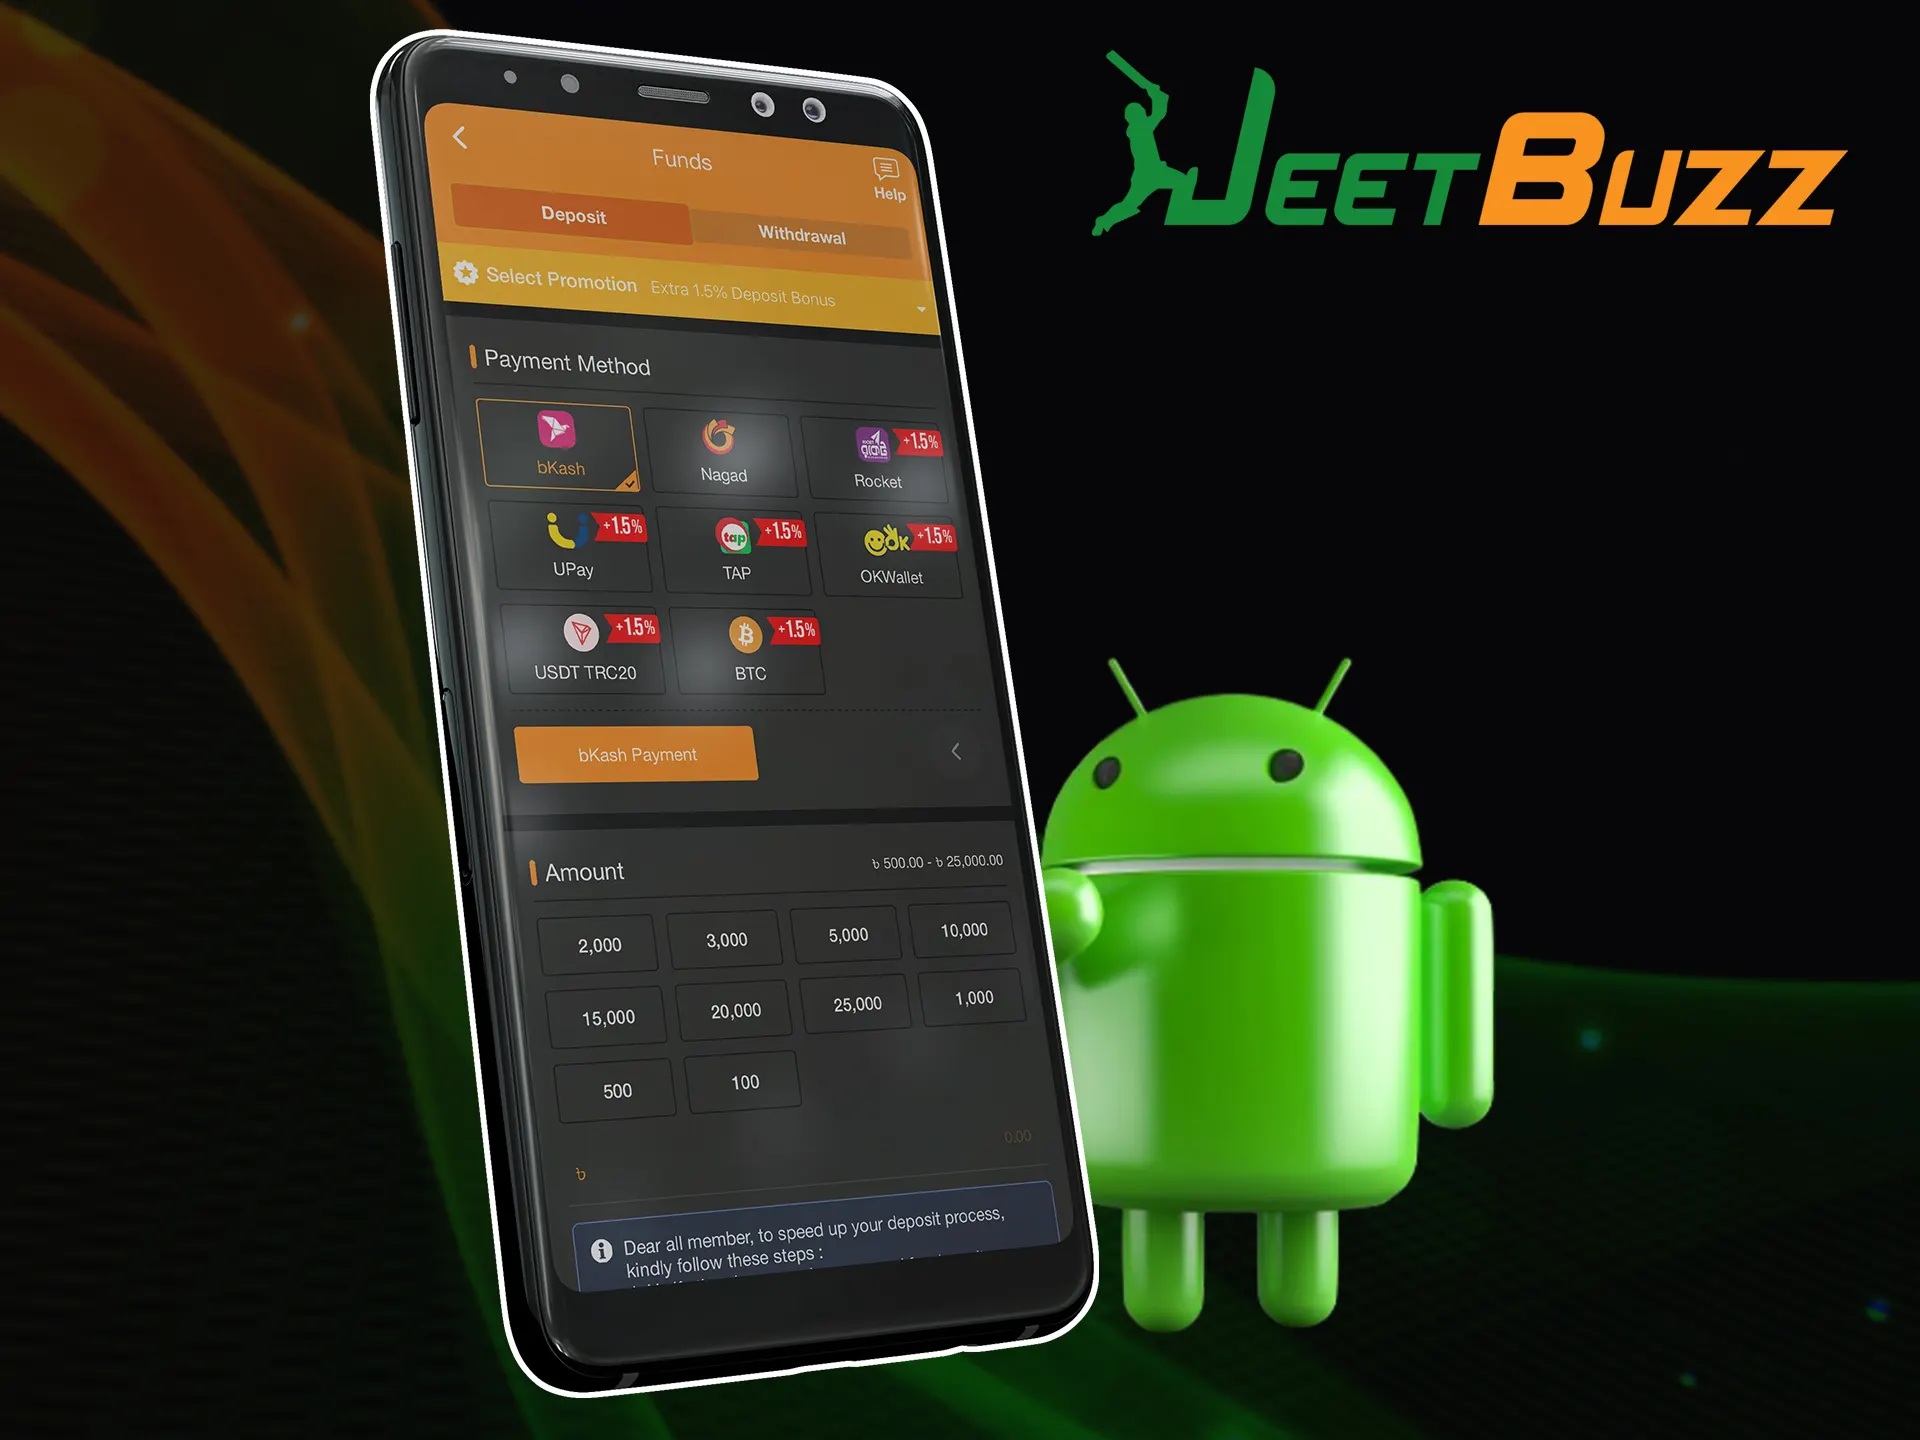 Download JeetBuzz Android app to play casino games.